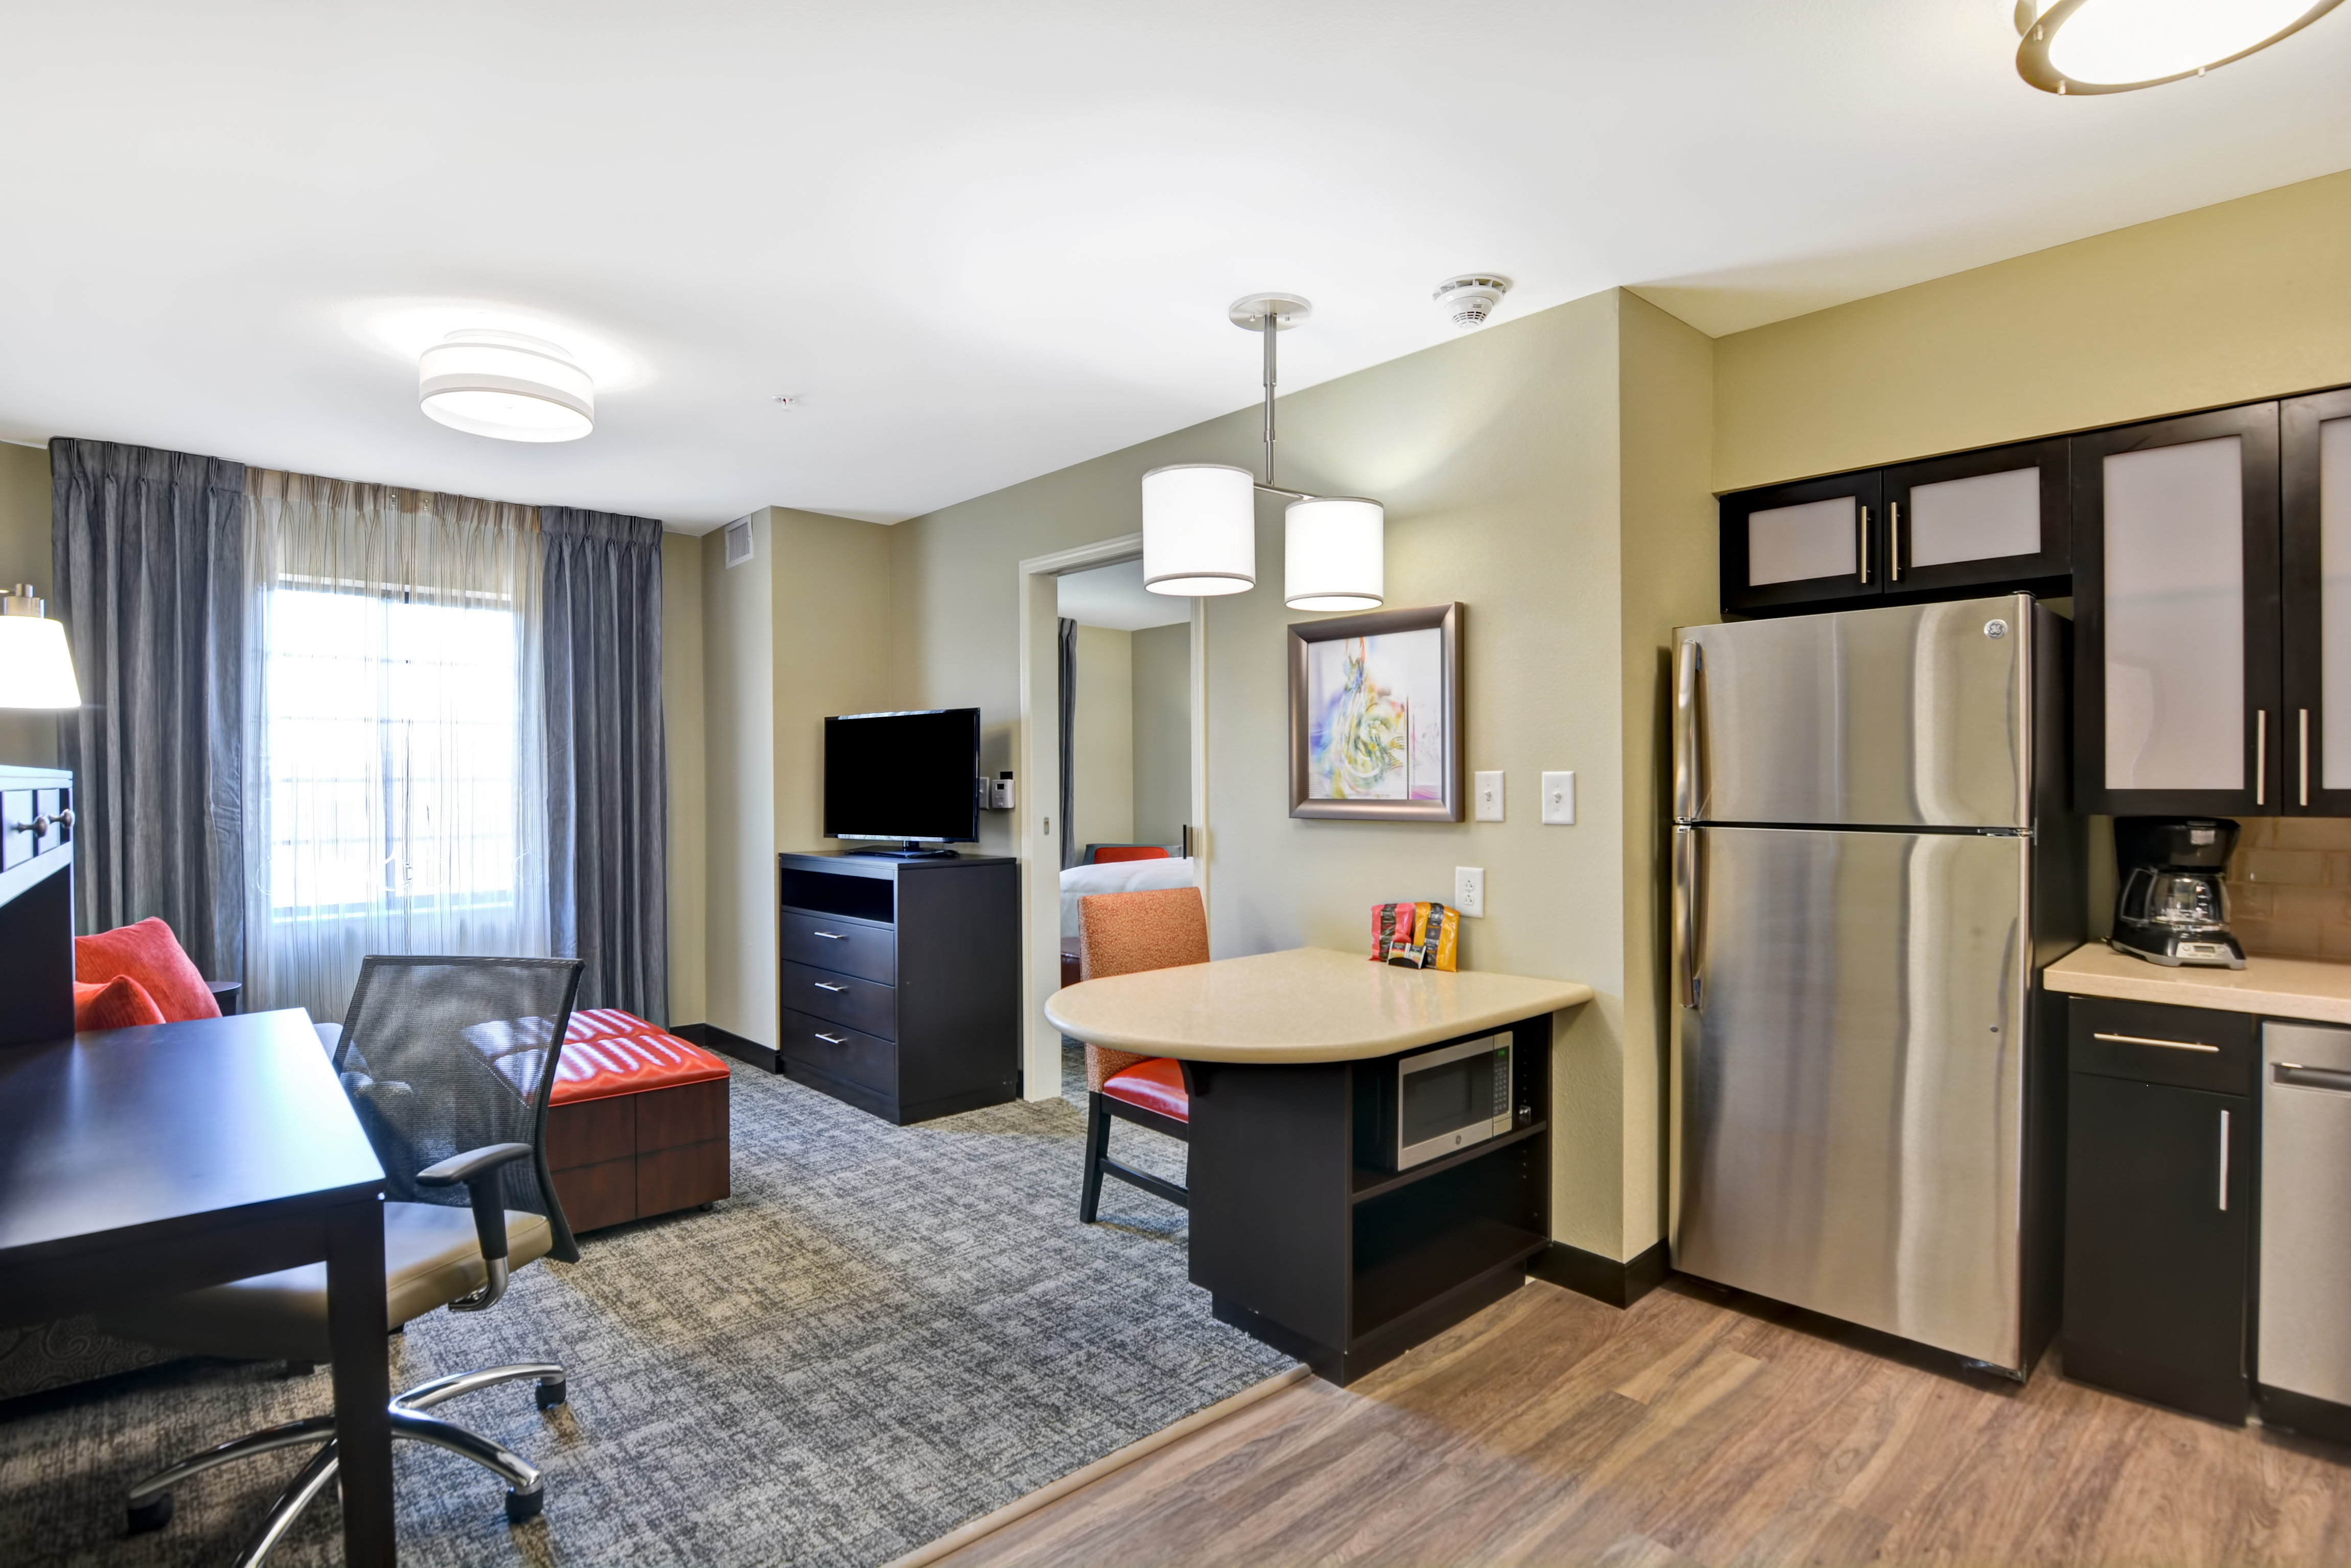 Our fully equipped suites are ideal for extended stays.